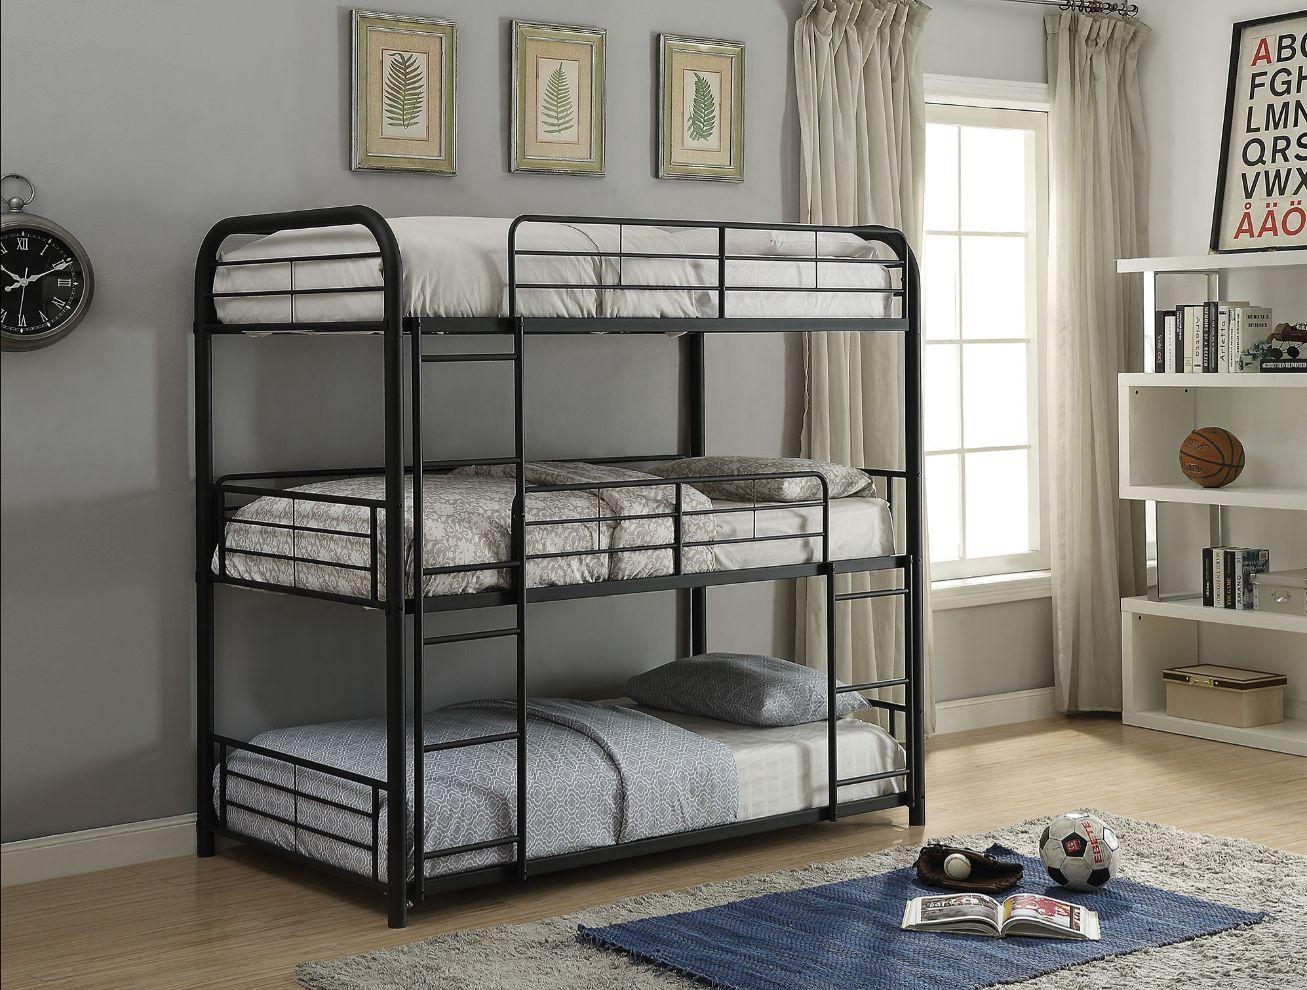 Simple T/t/t triple bunk bed Cairo 37335 in Black 